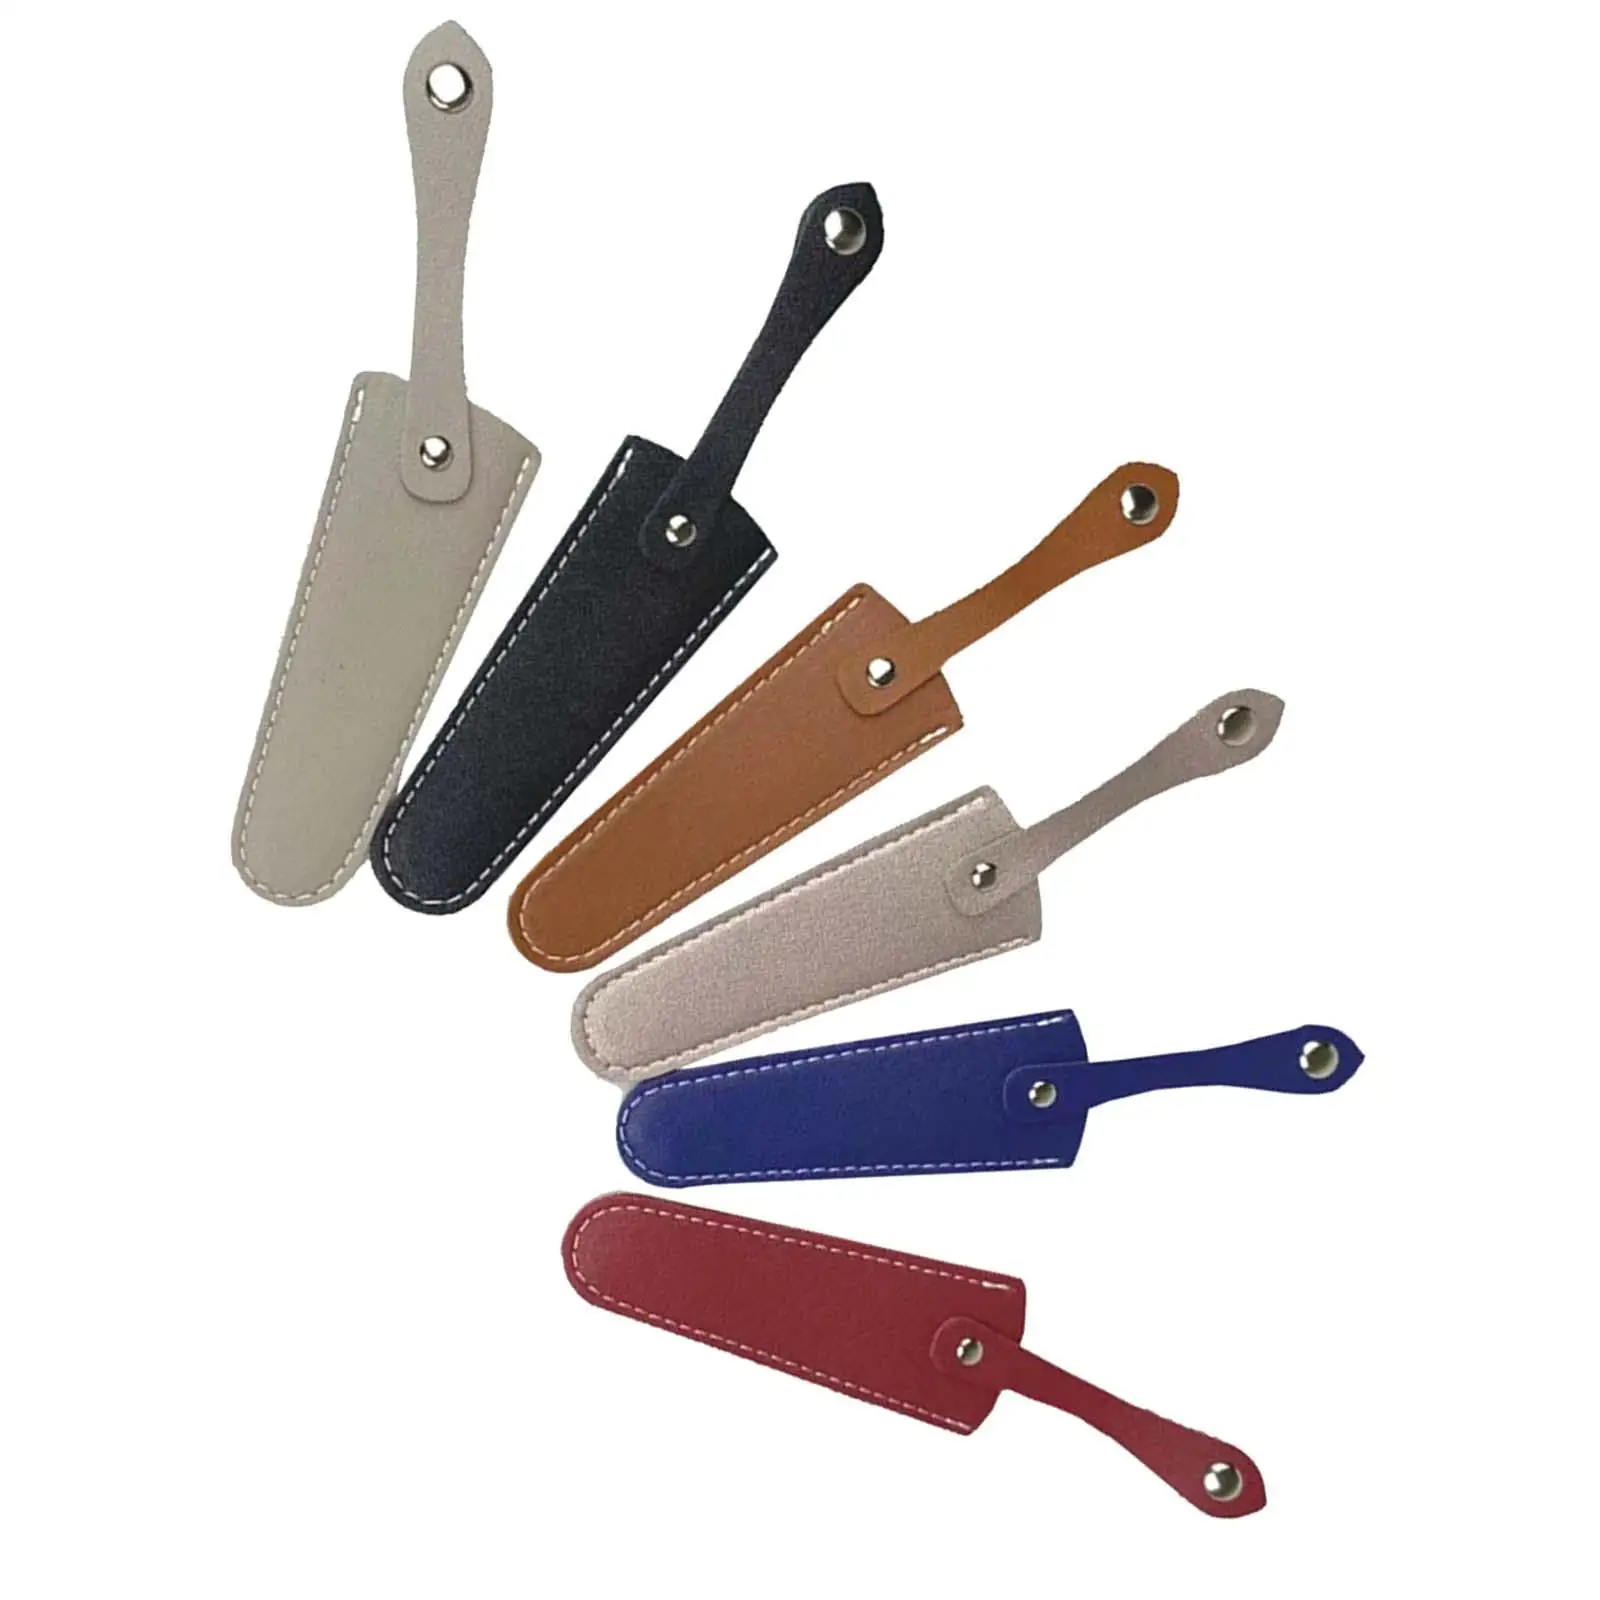 6x Scissors Sheath Compact PU Leather Collect Bags Scissors Safety Sheath Bag for Hair Cutting Scissors Embroidery Hairdressers